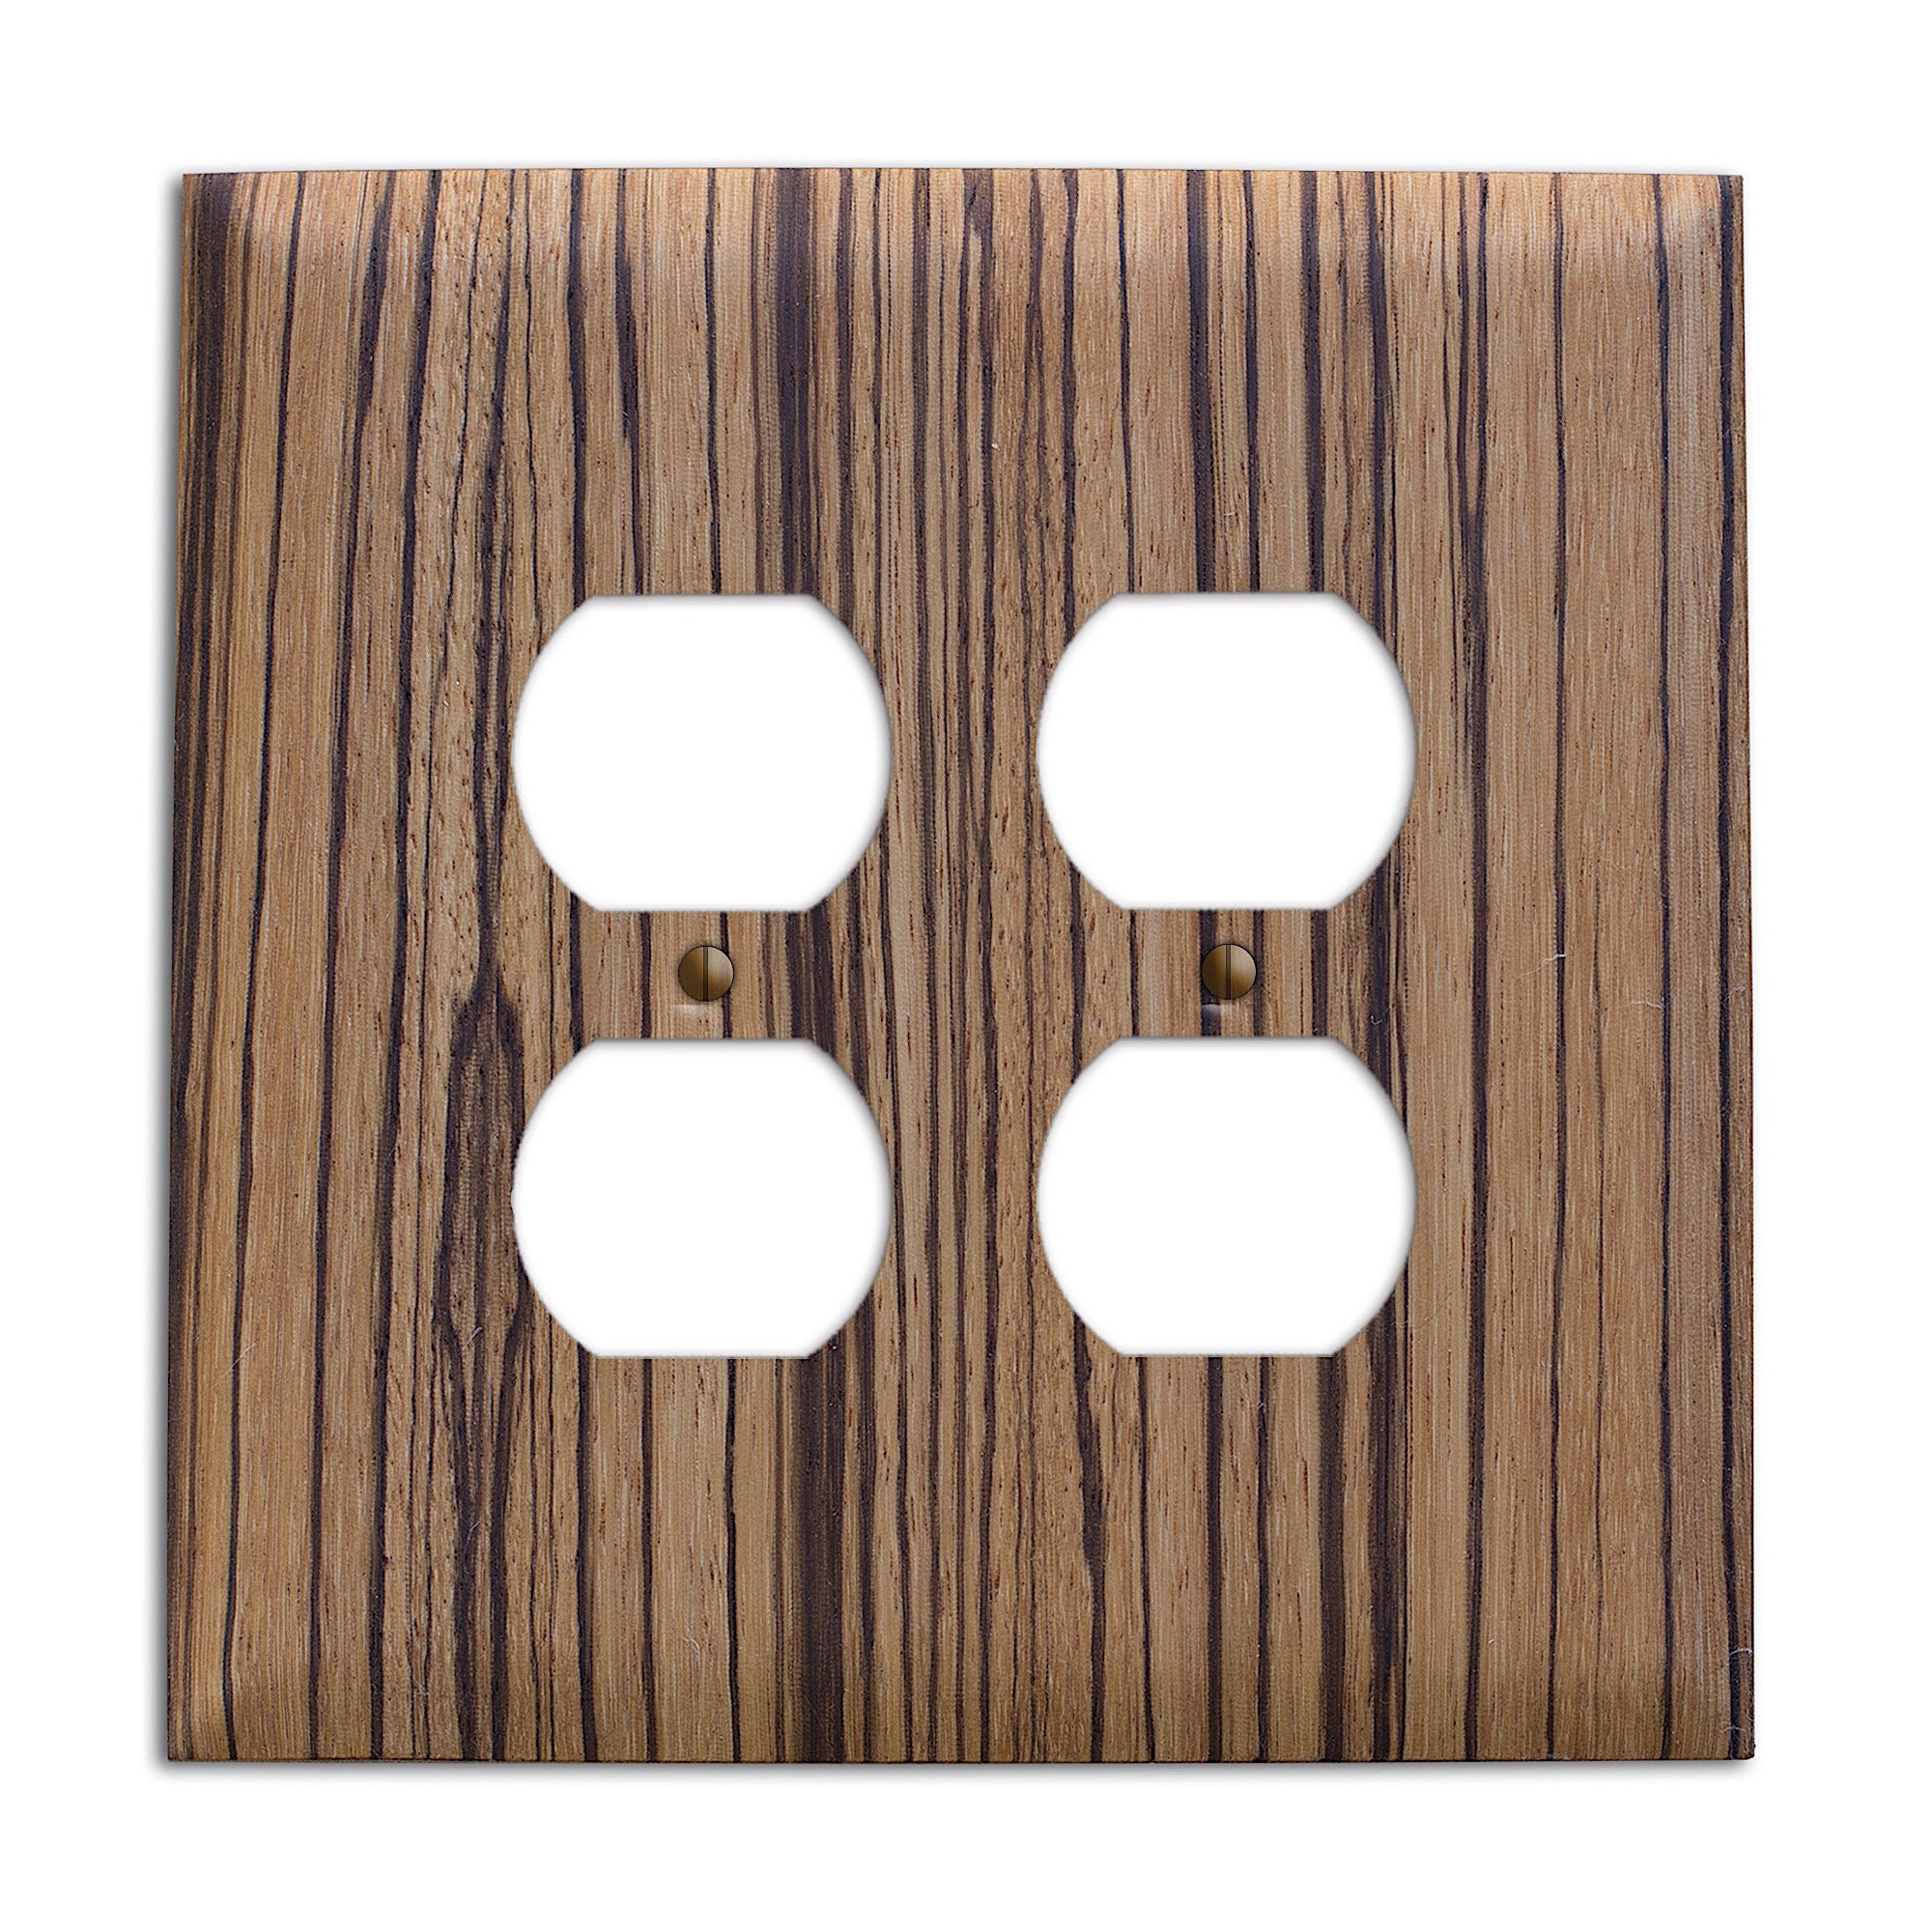 Zebrawood Switch Plate Cover, Outlet Cover, Lightswitch Cover